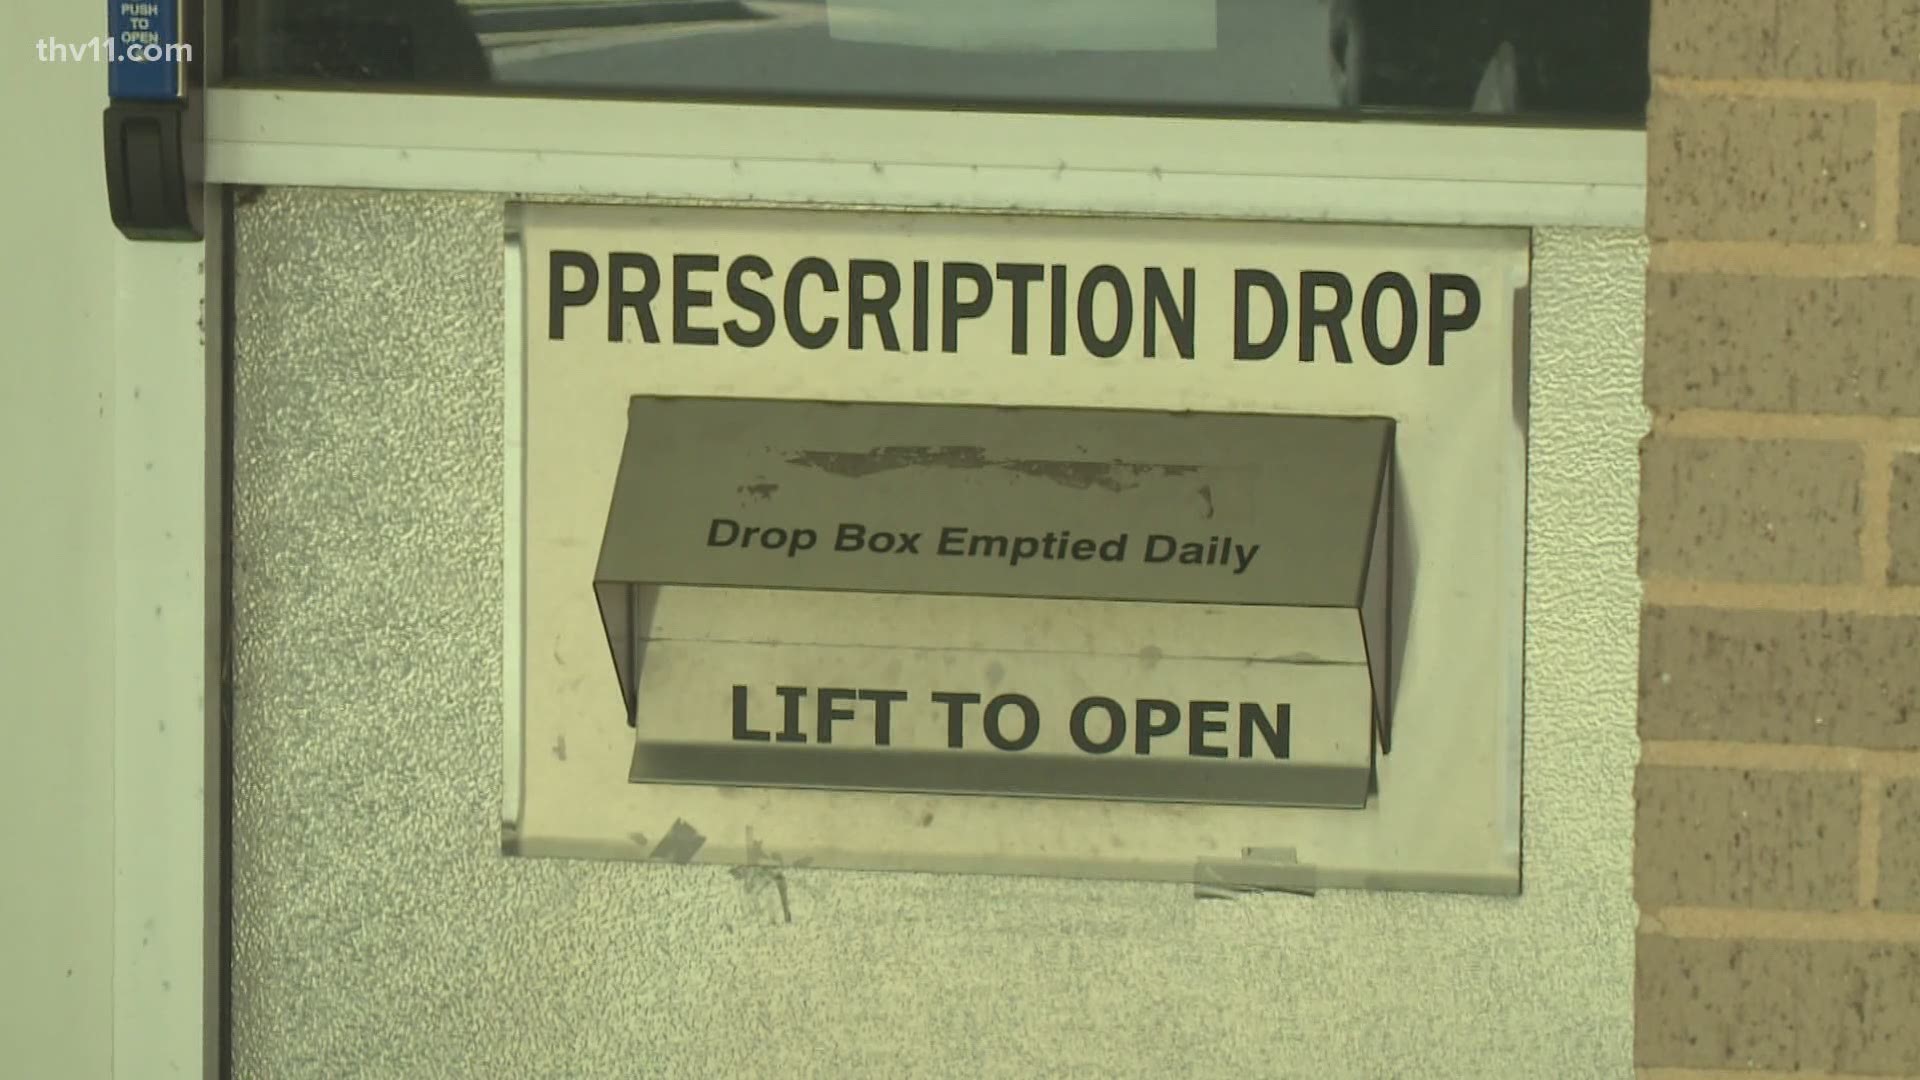 Arkansas brought in 39,000 pounds of unwanted and expired medications to safely dispose of.